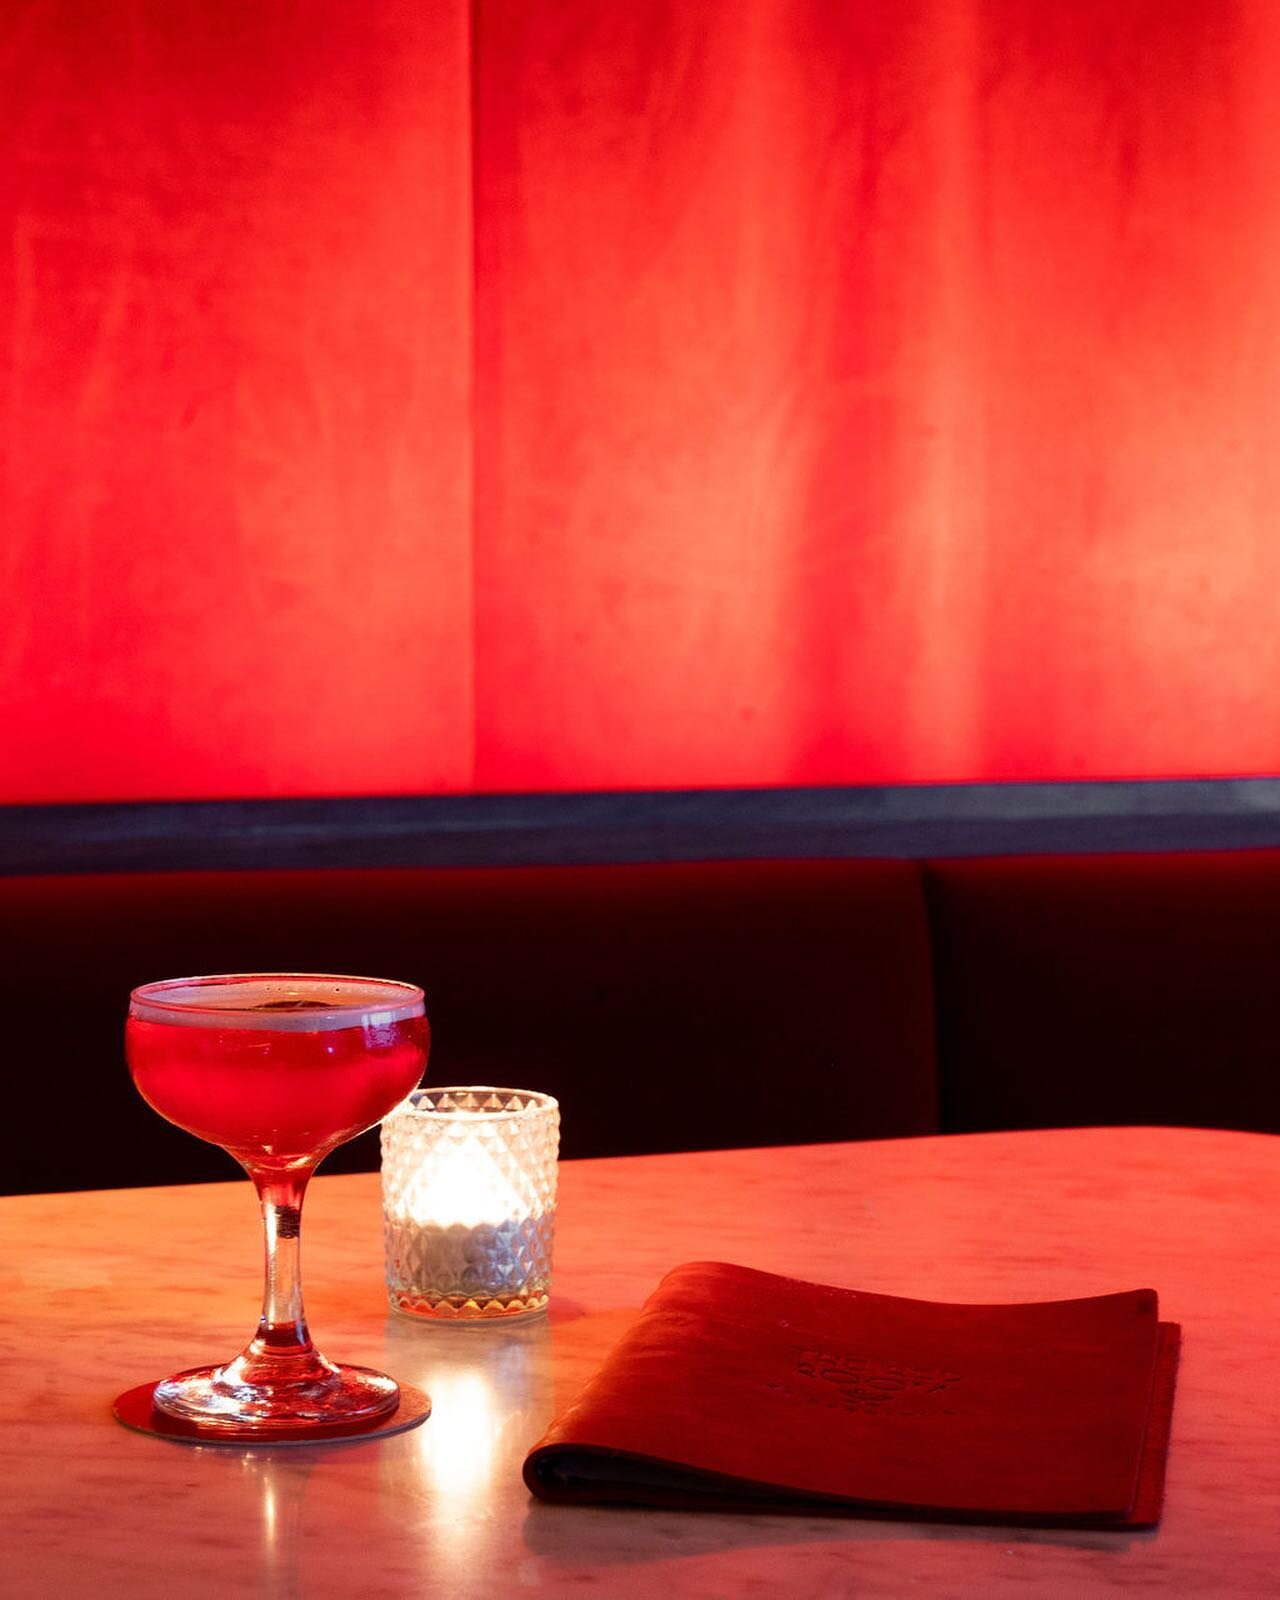 Re-introducing: The Blood Orange Cosmo, still the same delicious cocktail just repackaged with a few more bells and whistles. If you have had this at @annexkitchenfresno and love it, then you owe it to yourself to give ours a try, Cheers!
 
#redroomf